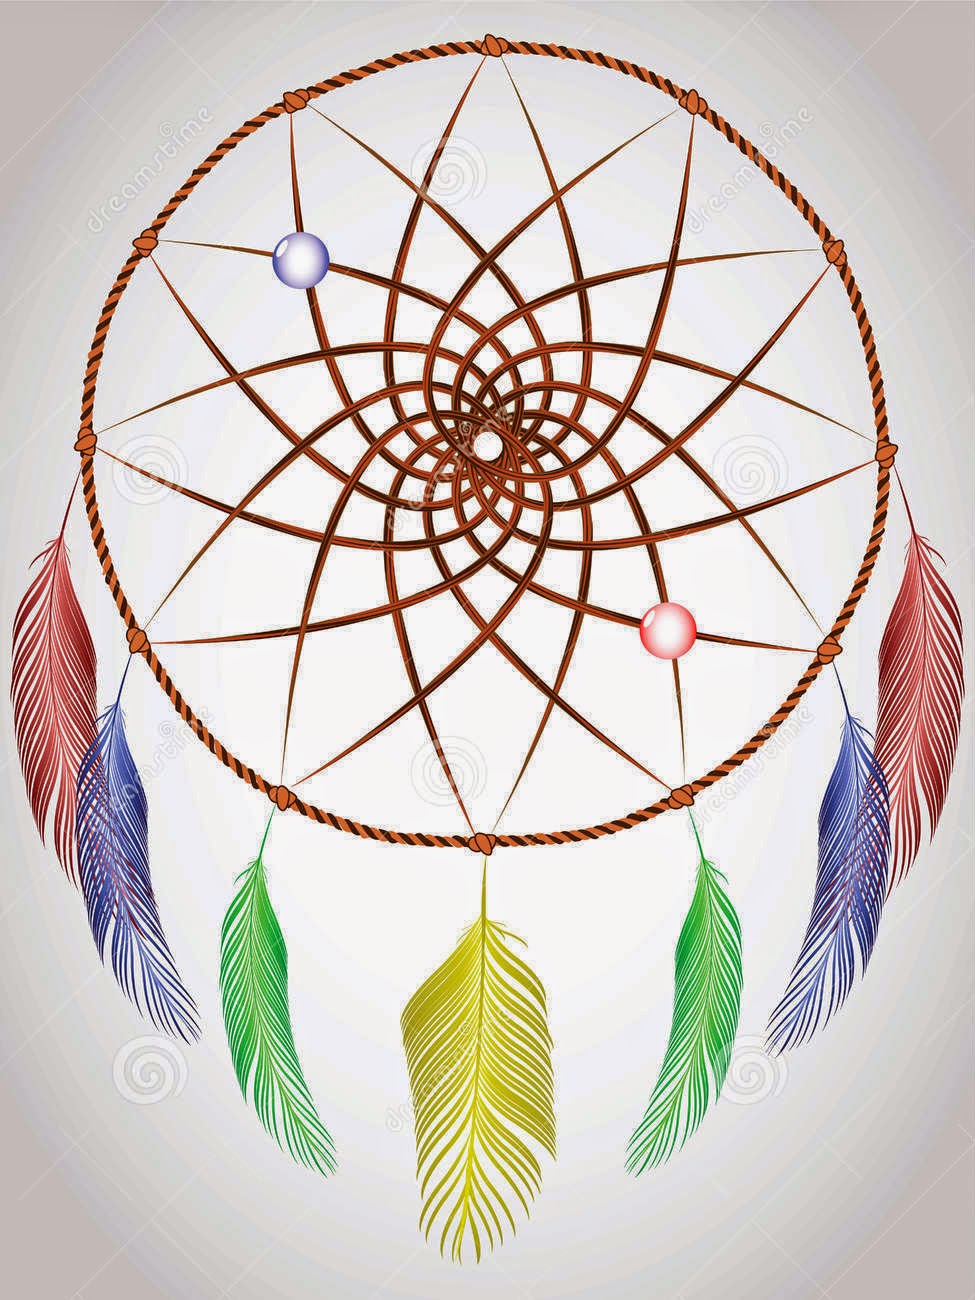 Dreamcatcher Most Beautiful Images In The Film The - Dream Catchers White Background - HD Wallpaper 